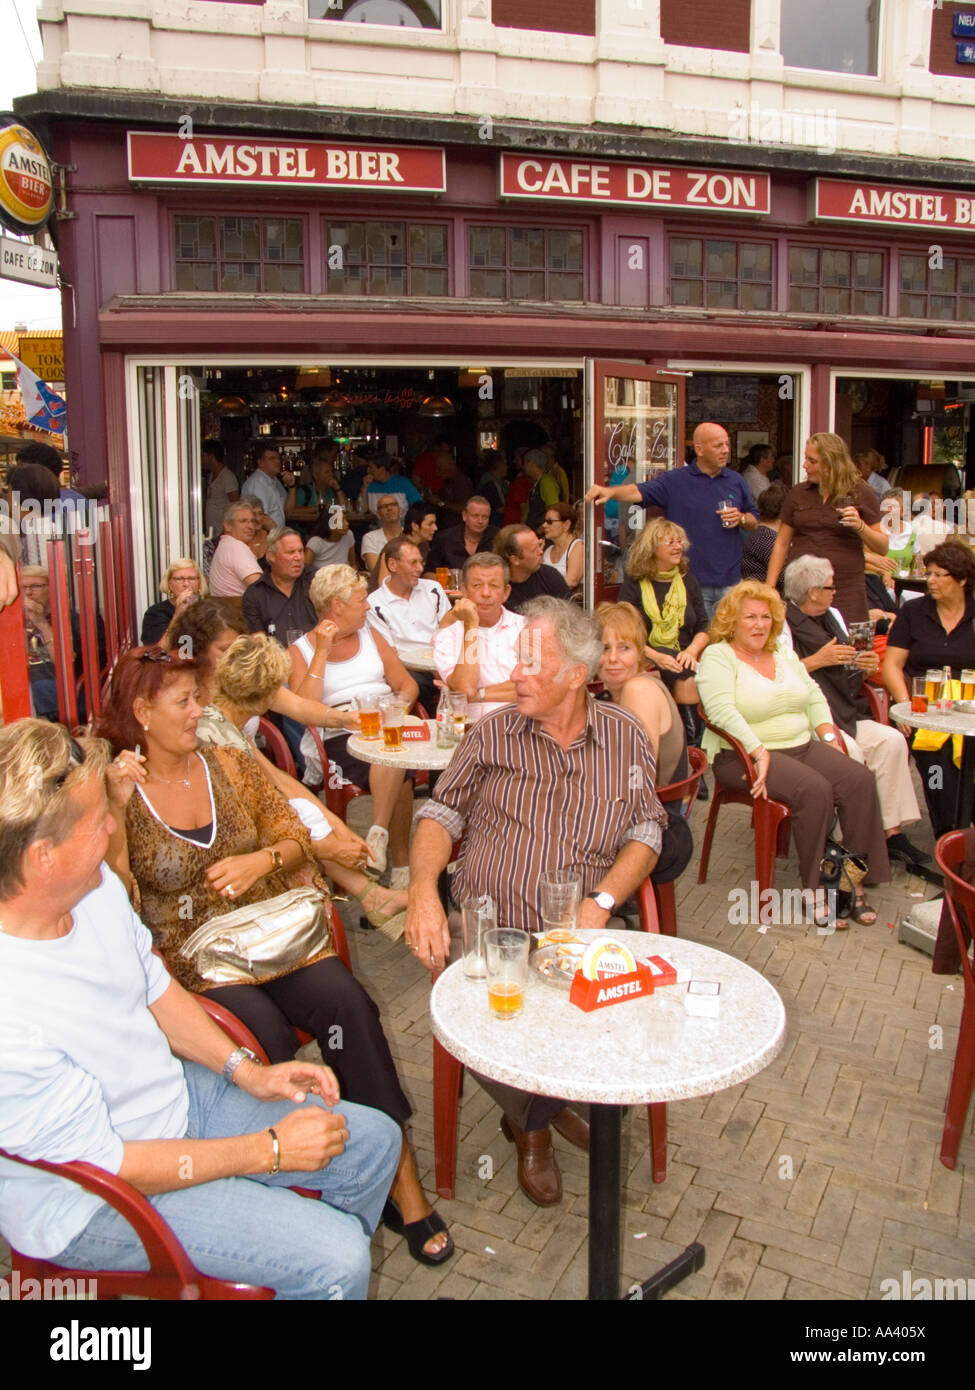 Crowds at cafe bar in Nieuwmarkt square watch outdoor entertainment Amsterdam The Netherlands Stock Photo